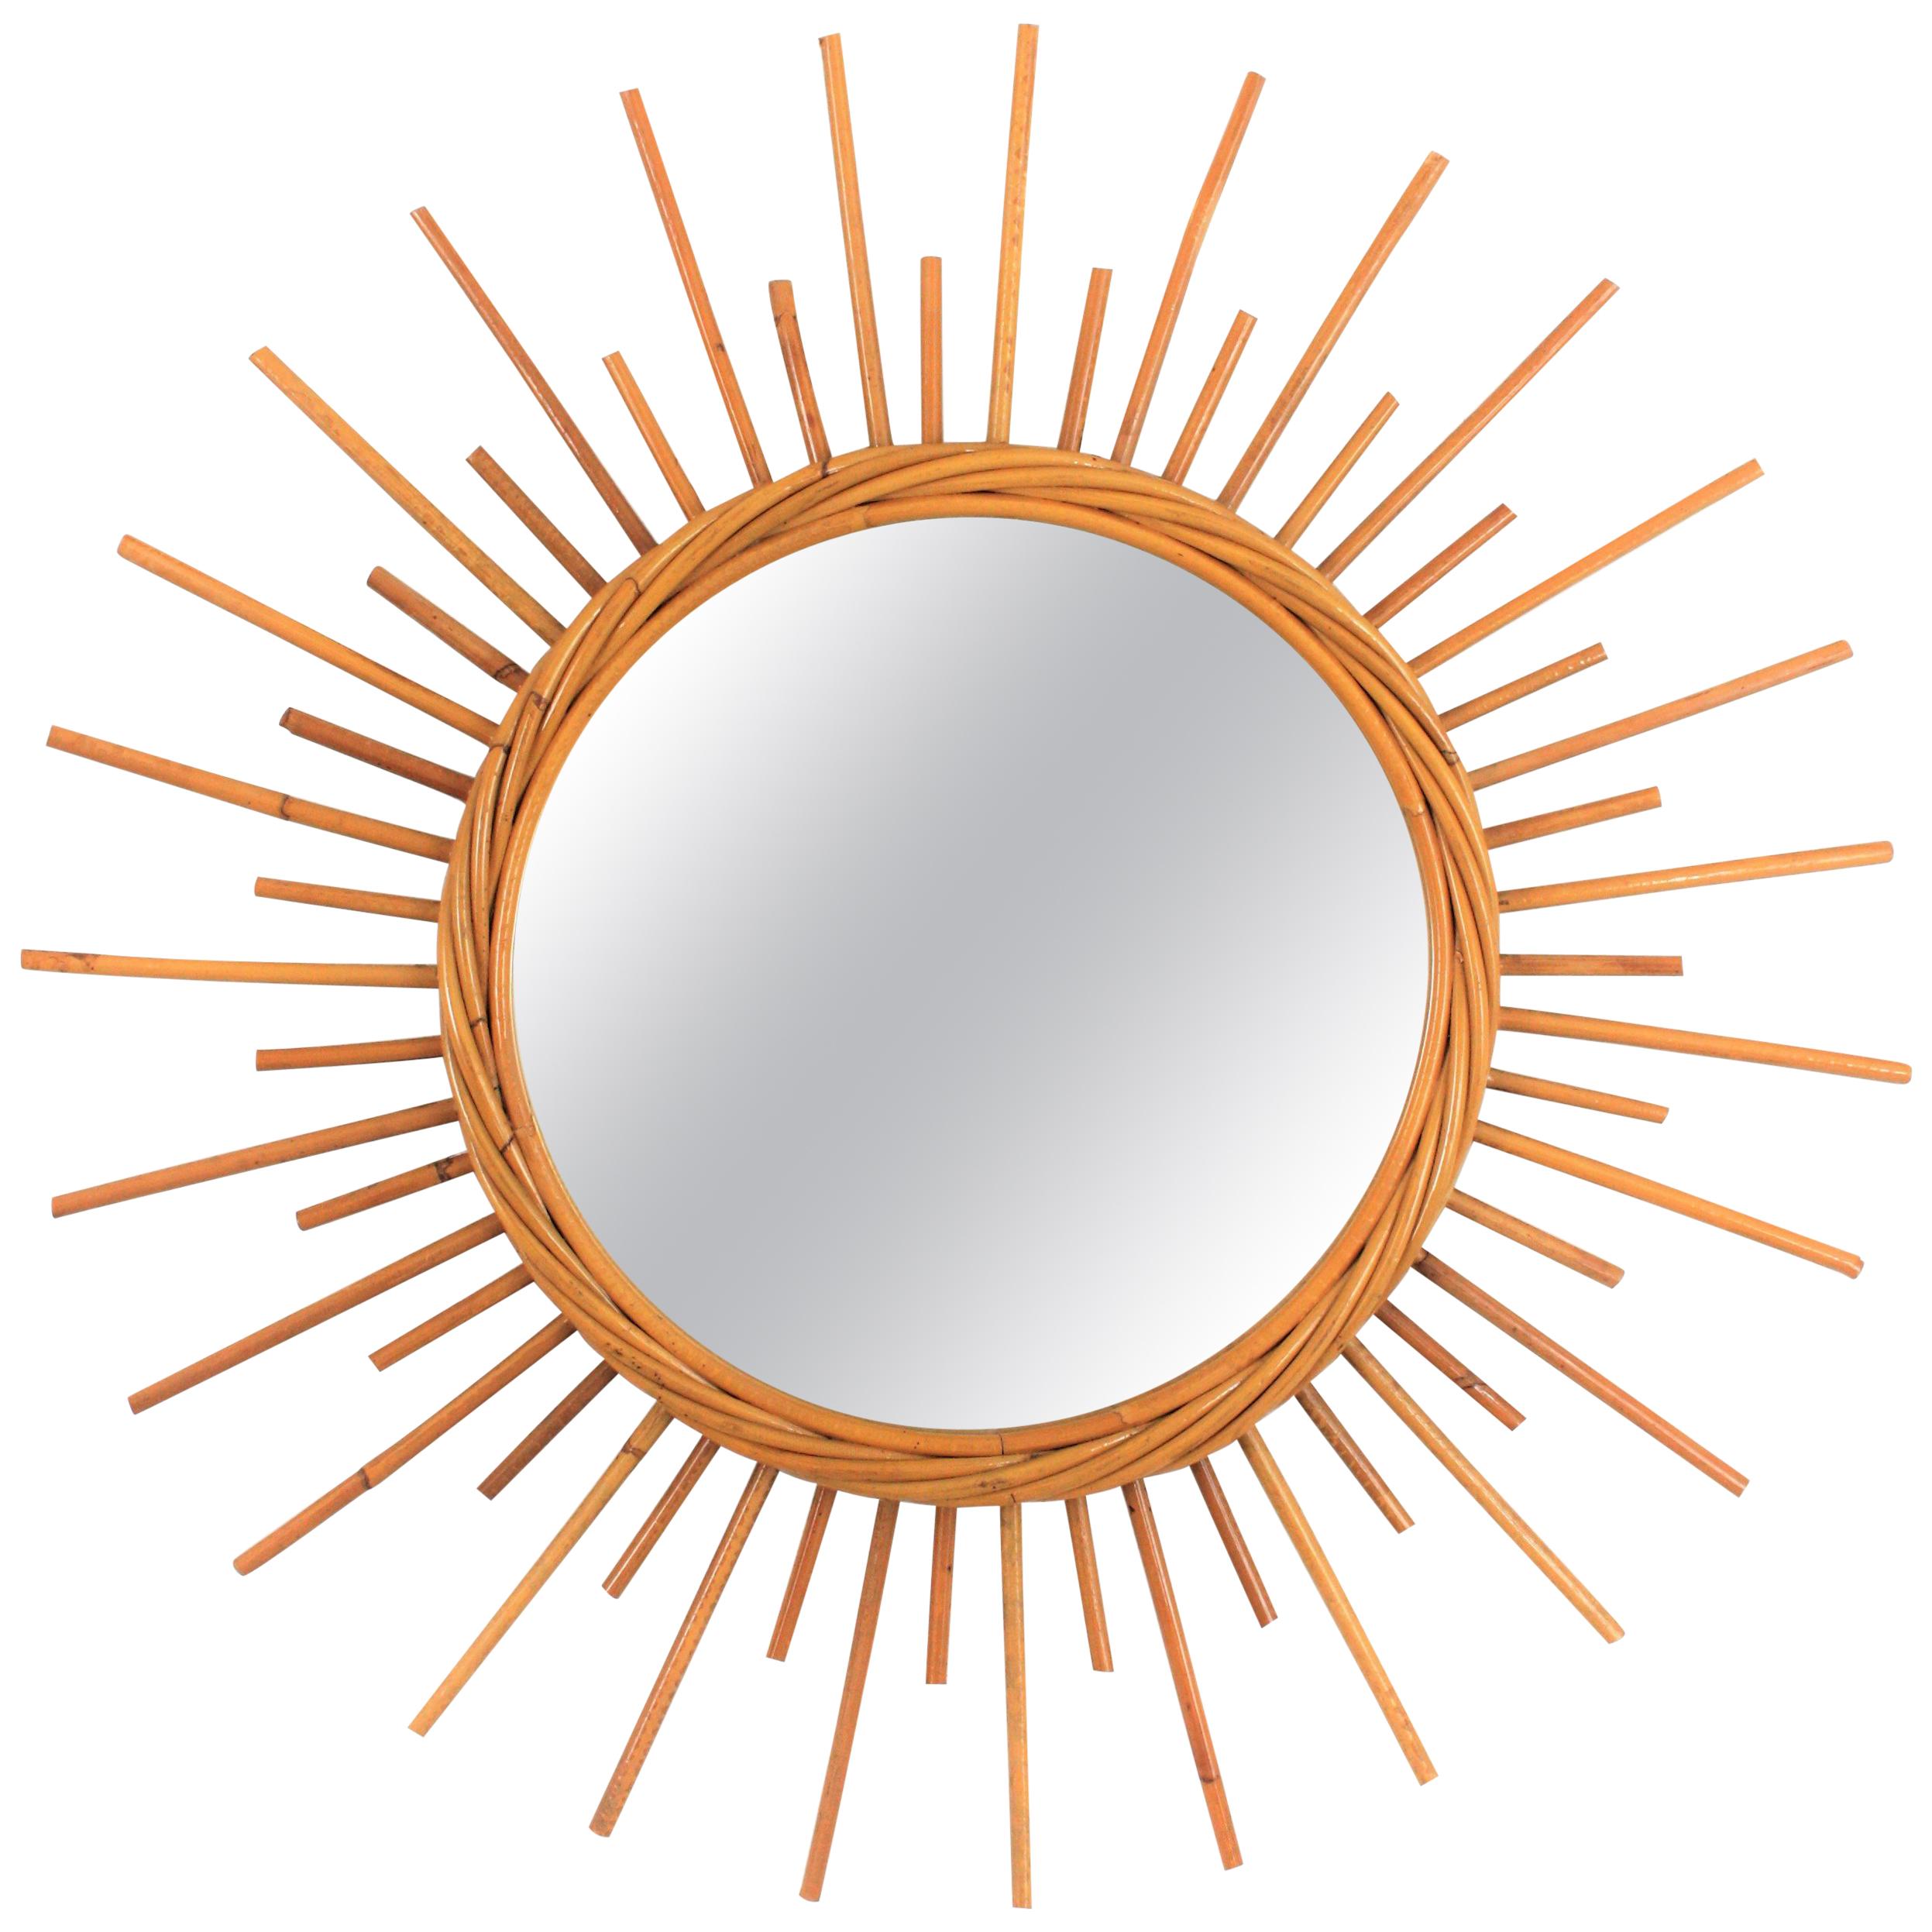 Rattan Sunburst Mirror from the French Riviera, 1960s For Sale 7